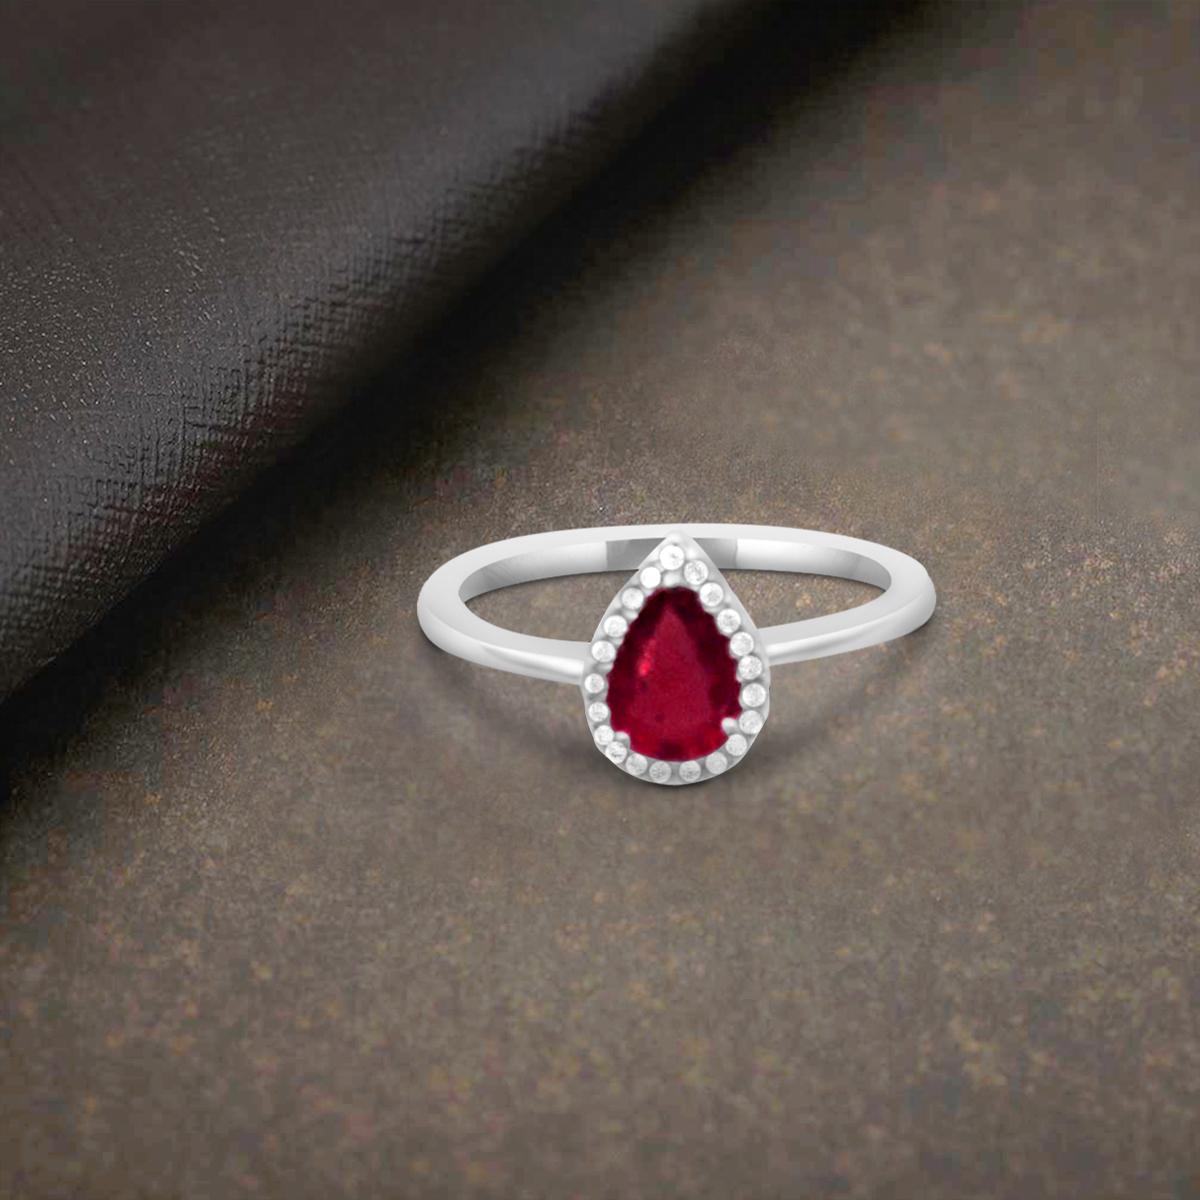 Solid 18K White Gold Pear Shaped Red Simulated Ruby And White Diamond Ring Or Fashion Band Prong Set Solitaire Shaped Halo Ring.
This Gorgeous Ring Features A Stunning 7x5mm Pear Shaped Ruby Gemstone Weighing A Total Of 0.75 Carats.
Whichever Way